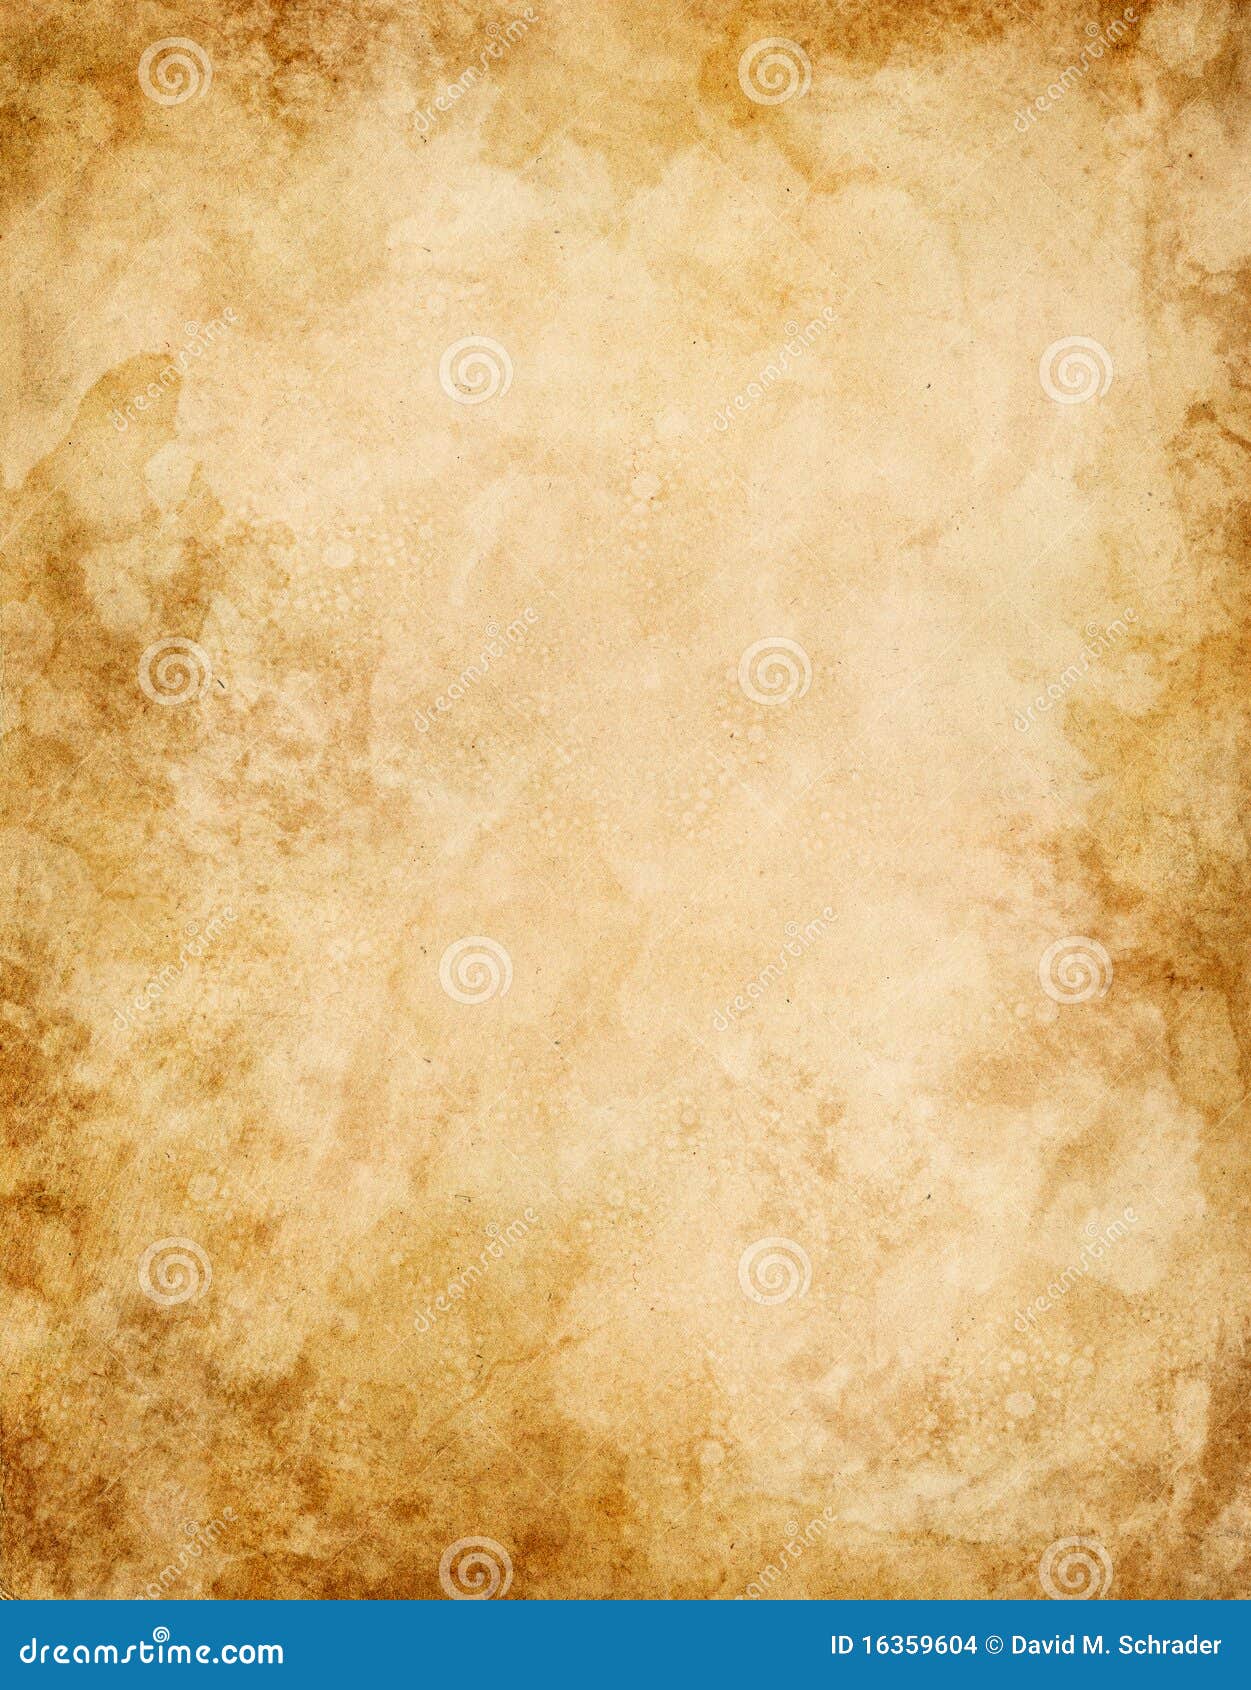 Old Water Stained Paper Stock Images - Image: 16359604